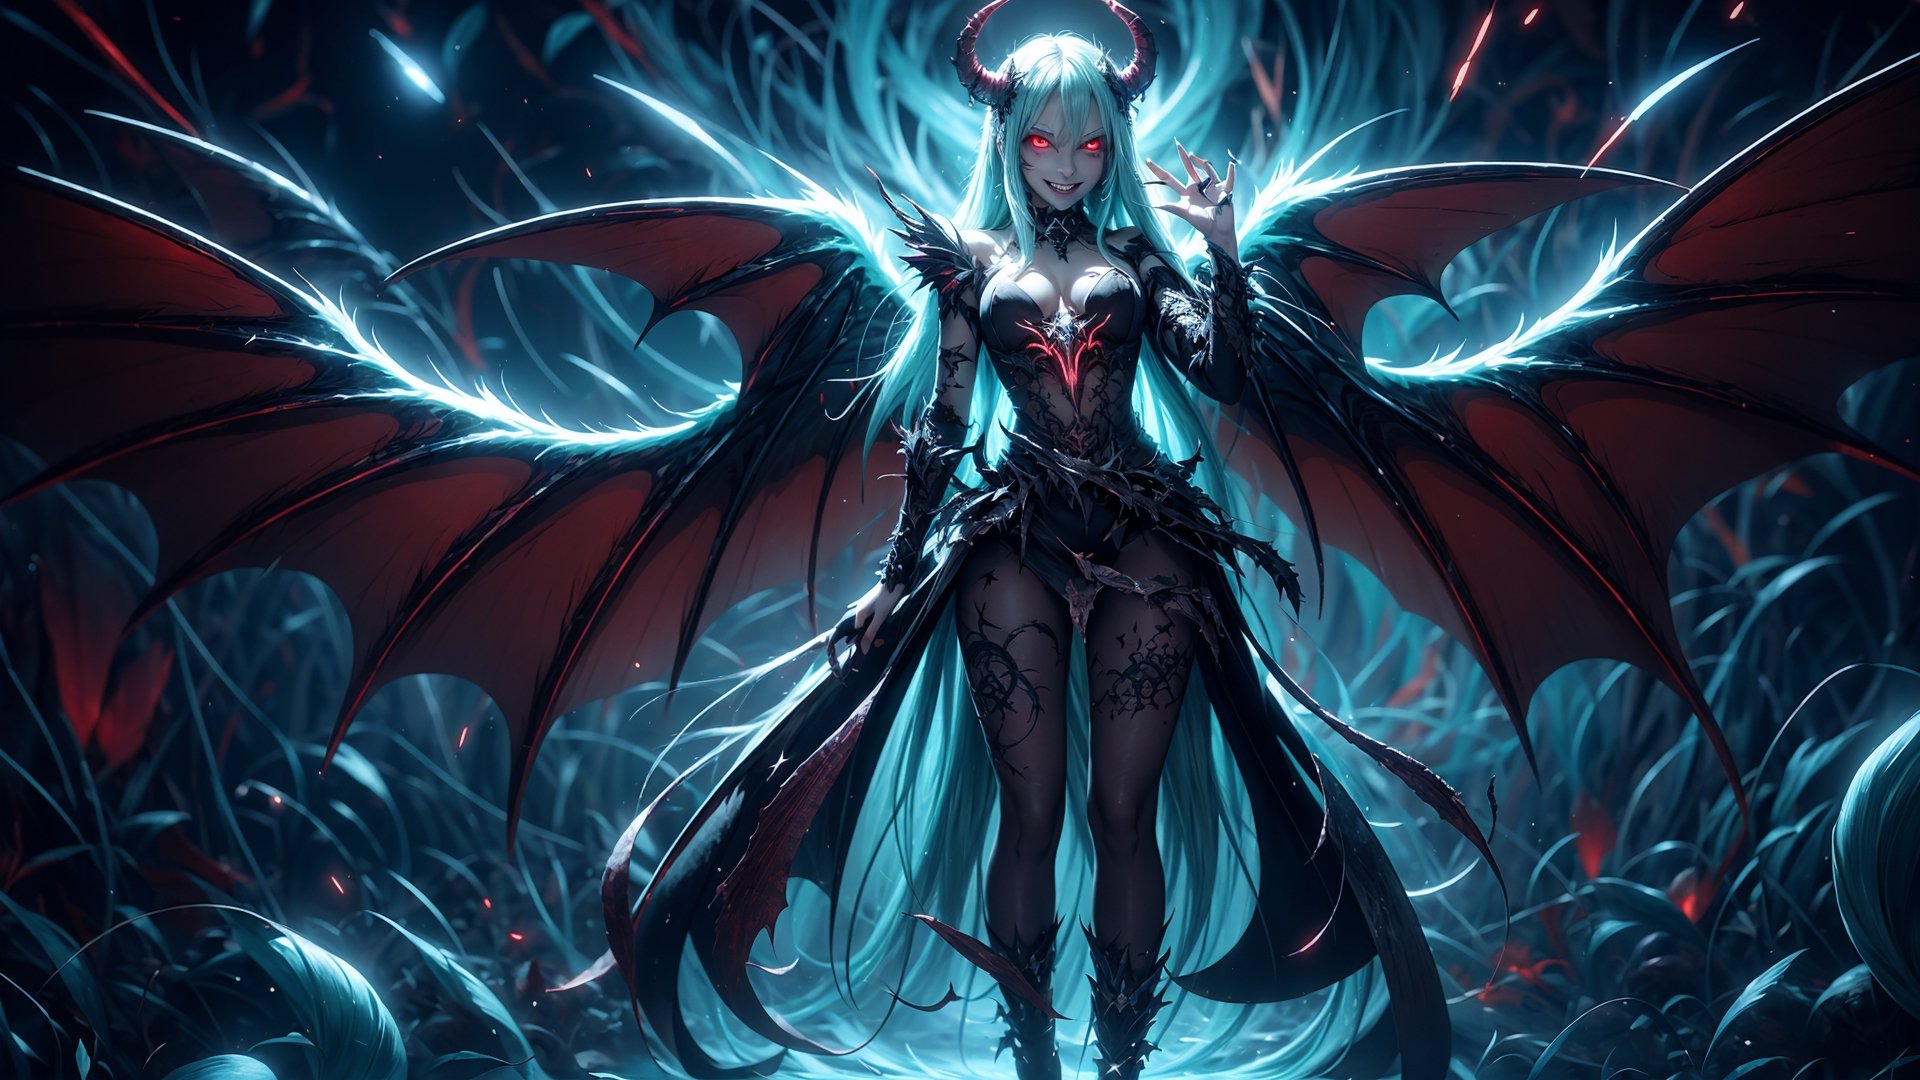 Cruely Cosmic Fallen Demon,cruel,Evil,, Glowing bright eyes, bioluminescent, creepy, Re, HELL SENT, Very bright colors, light particles, with glowing light, Mshiff, wallpaper art, UHD wallpaper terrible,Full body Image,Demonic Wings,evil glowing, evil grin,